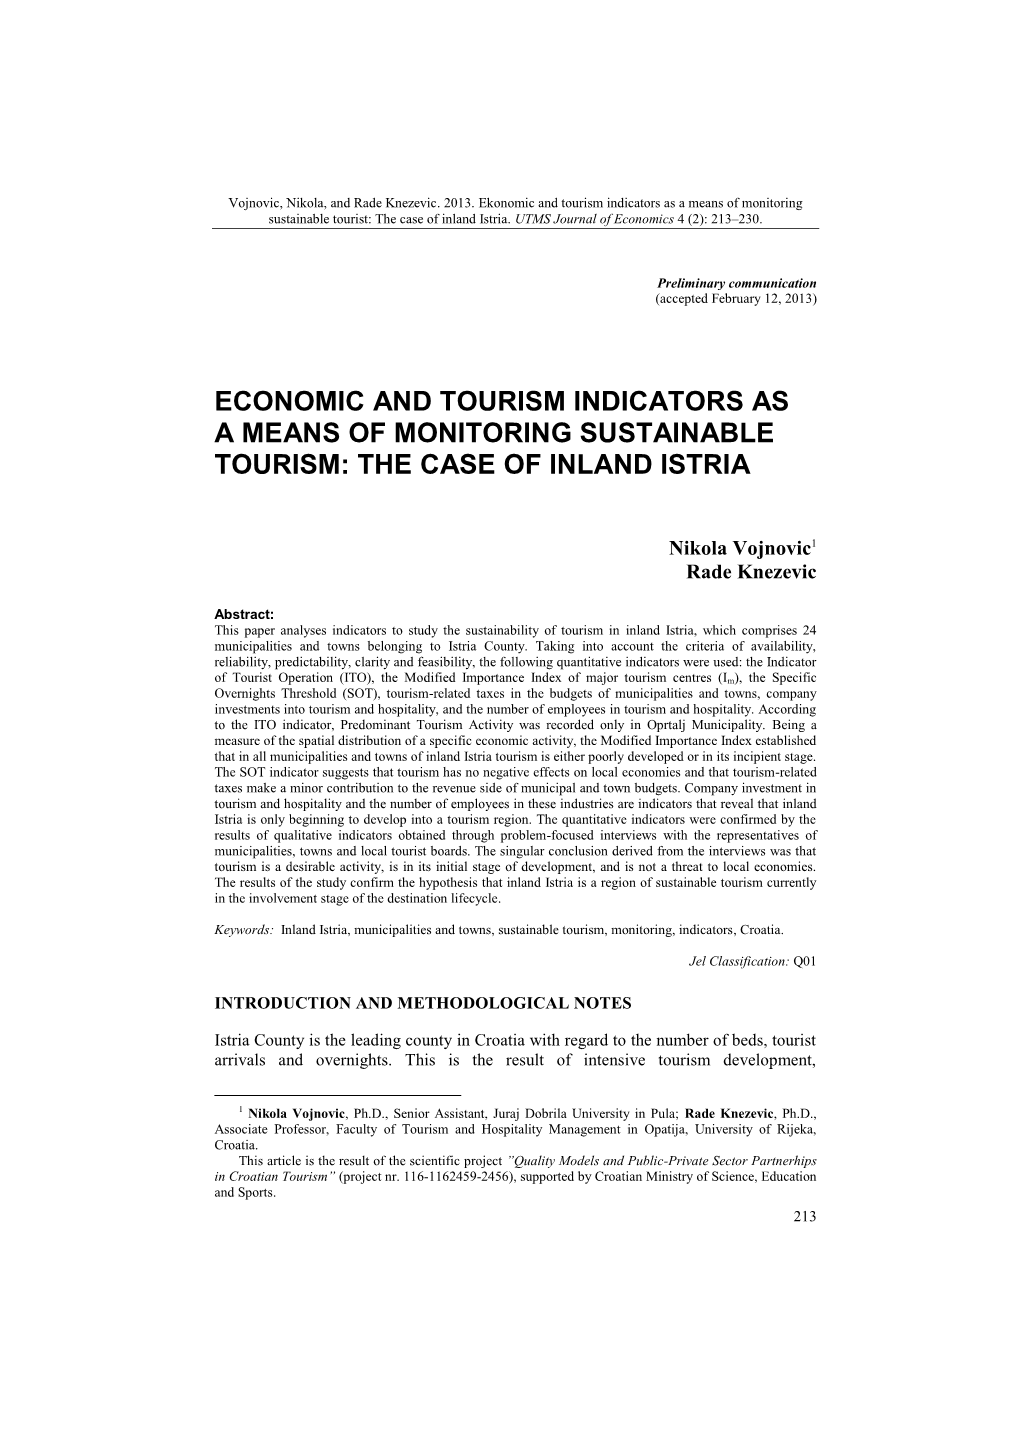 Economic and Tourism Indicators As a Means of Monitoring Sustainable Tourism: the Case of Inland Istria